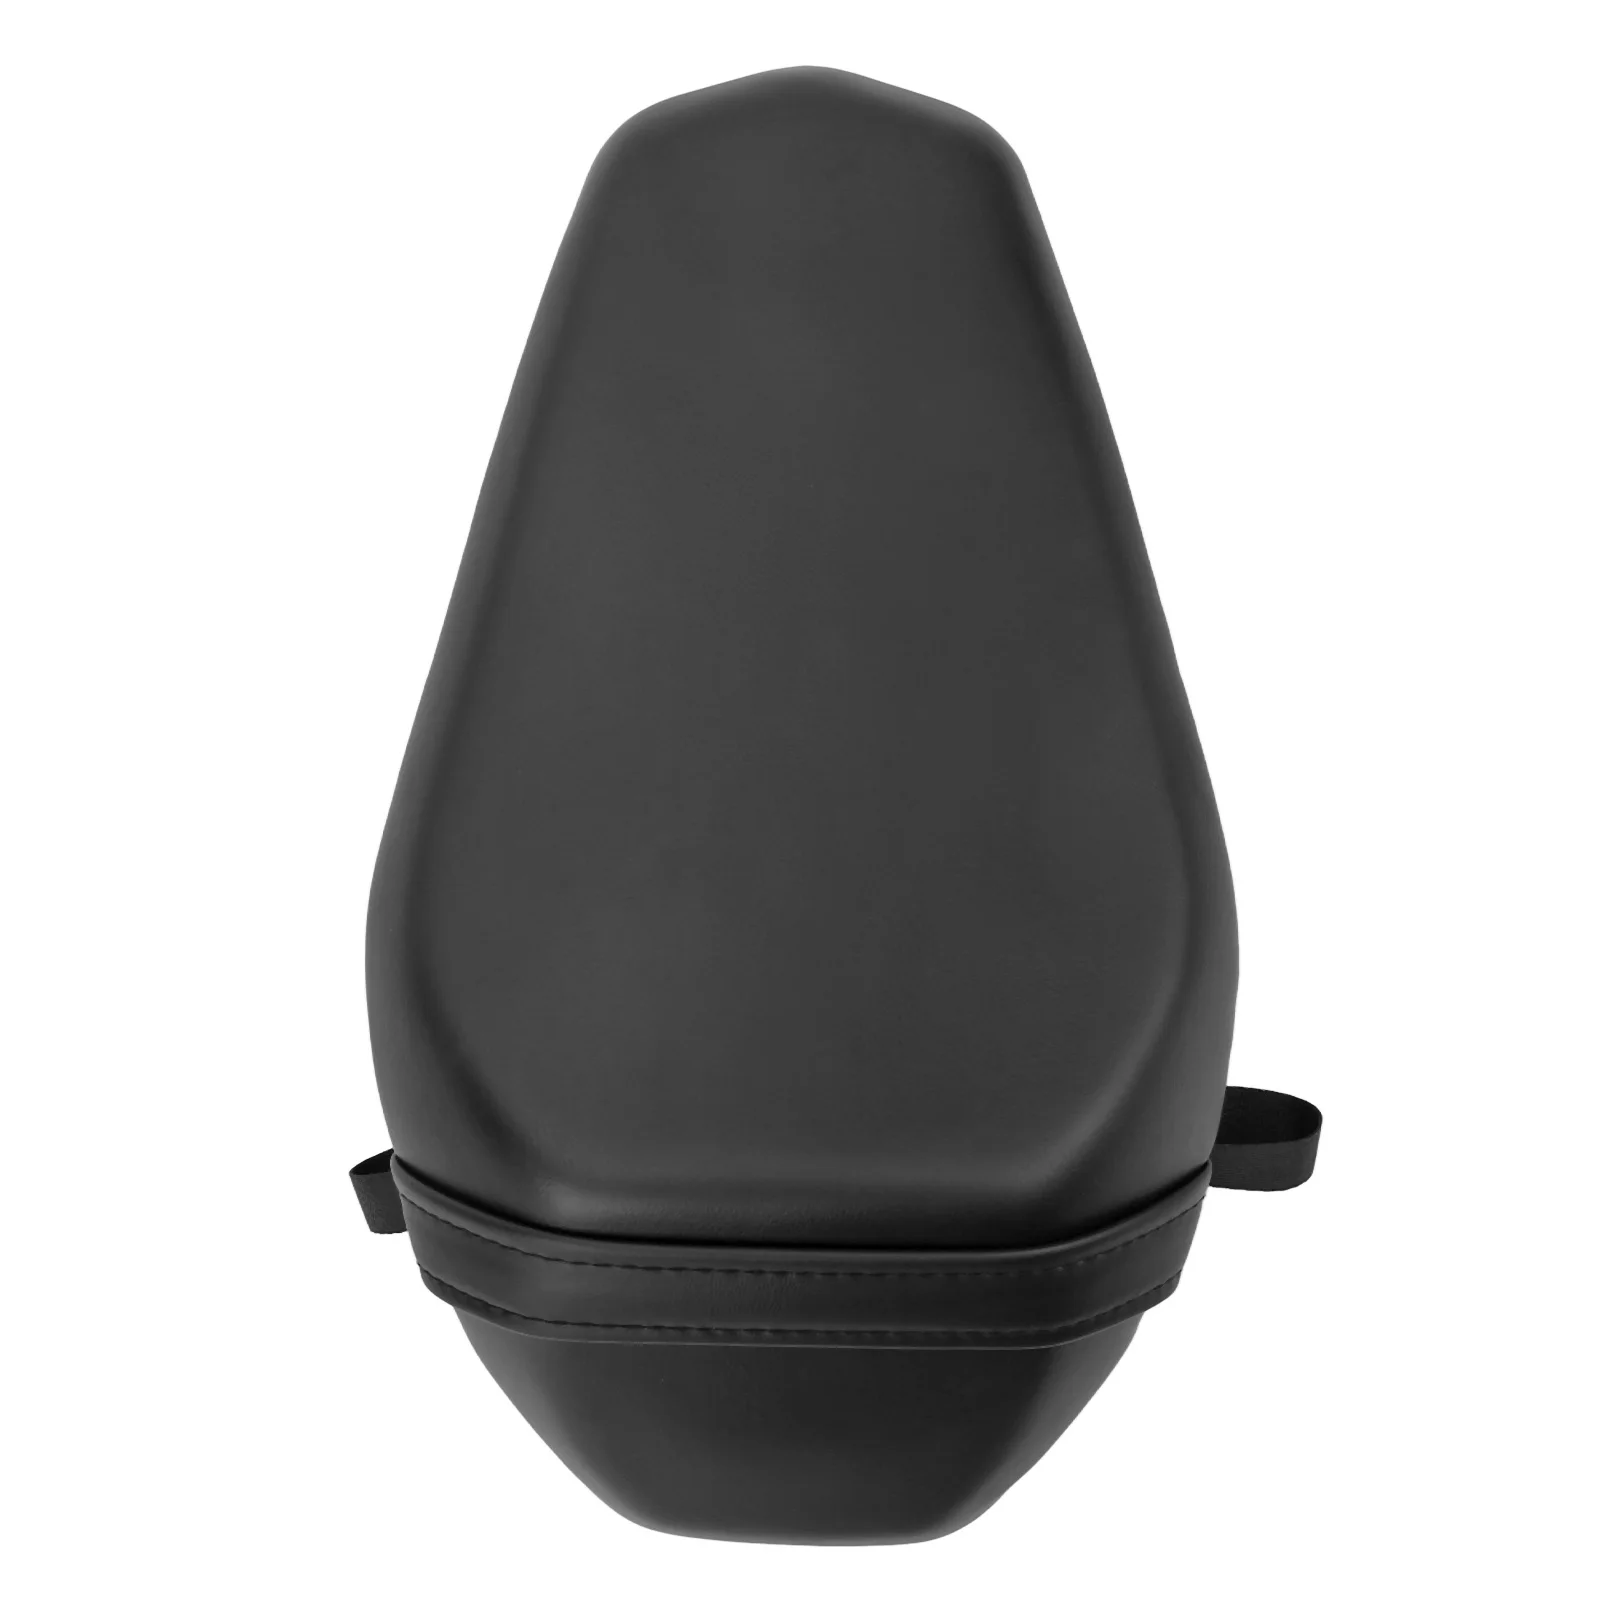 Motorcycle Rear Pillion Seat Cushion Pressure Relief Comfortable Passeng... - $41.95